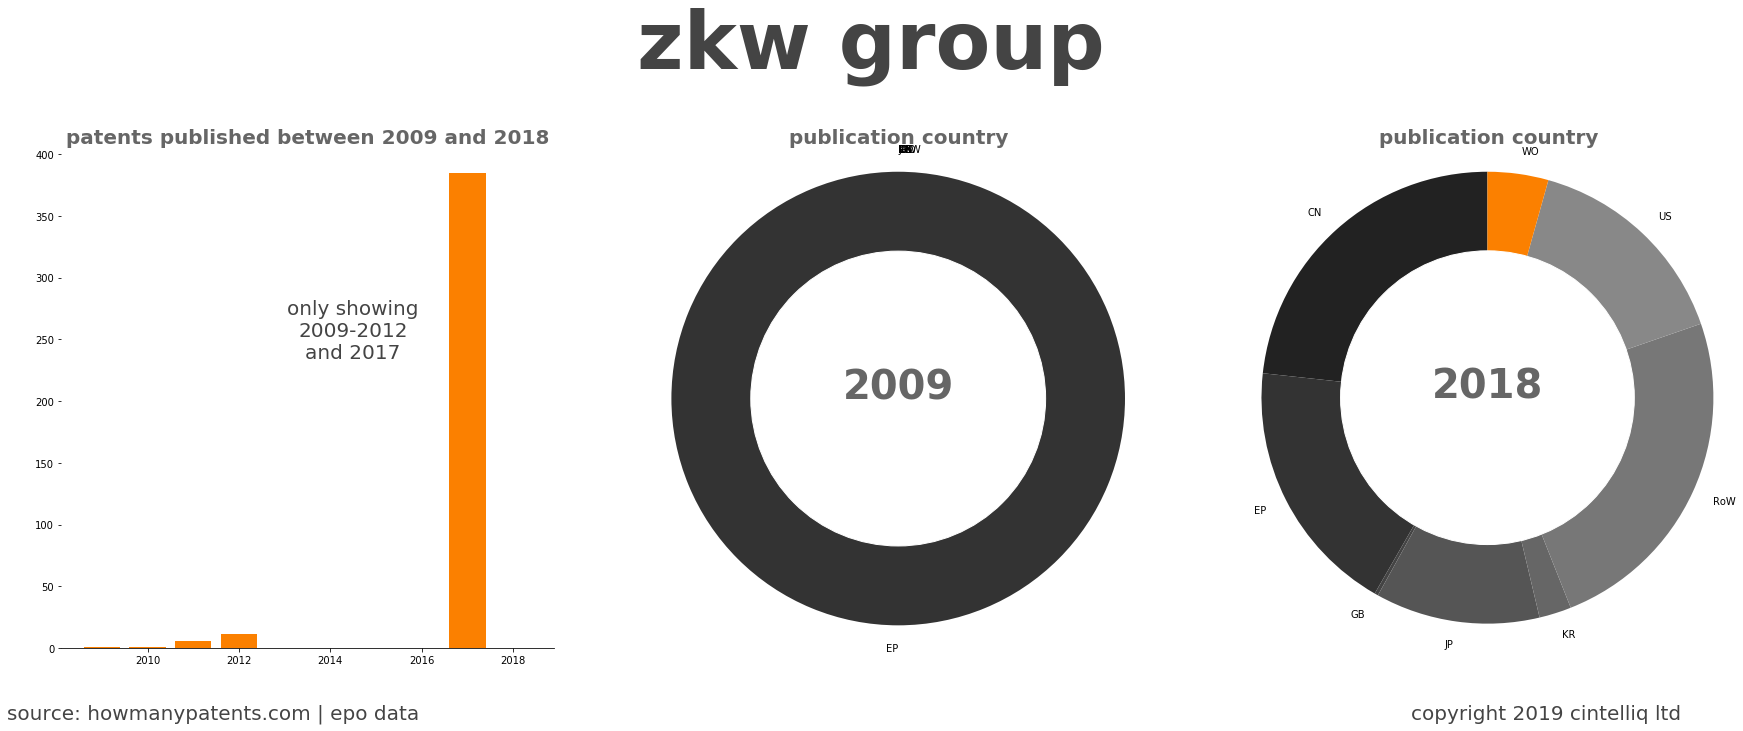 summary of patents for Zkw Group